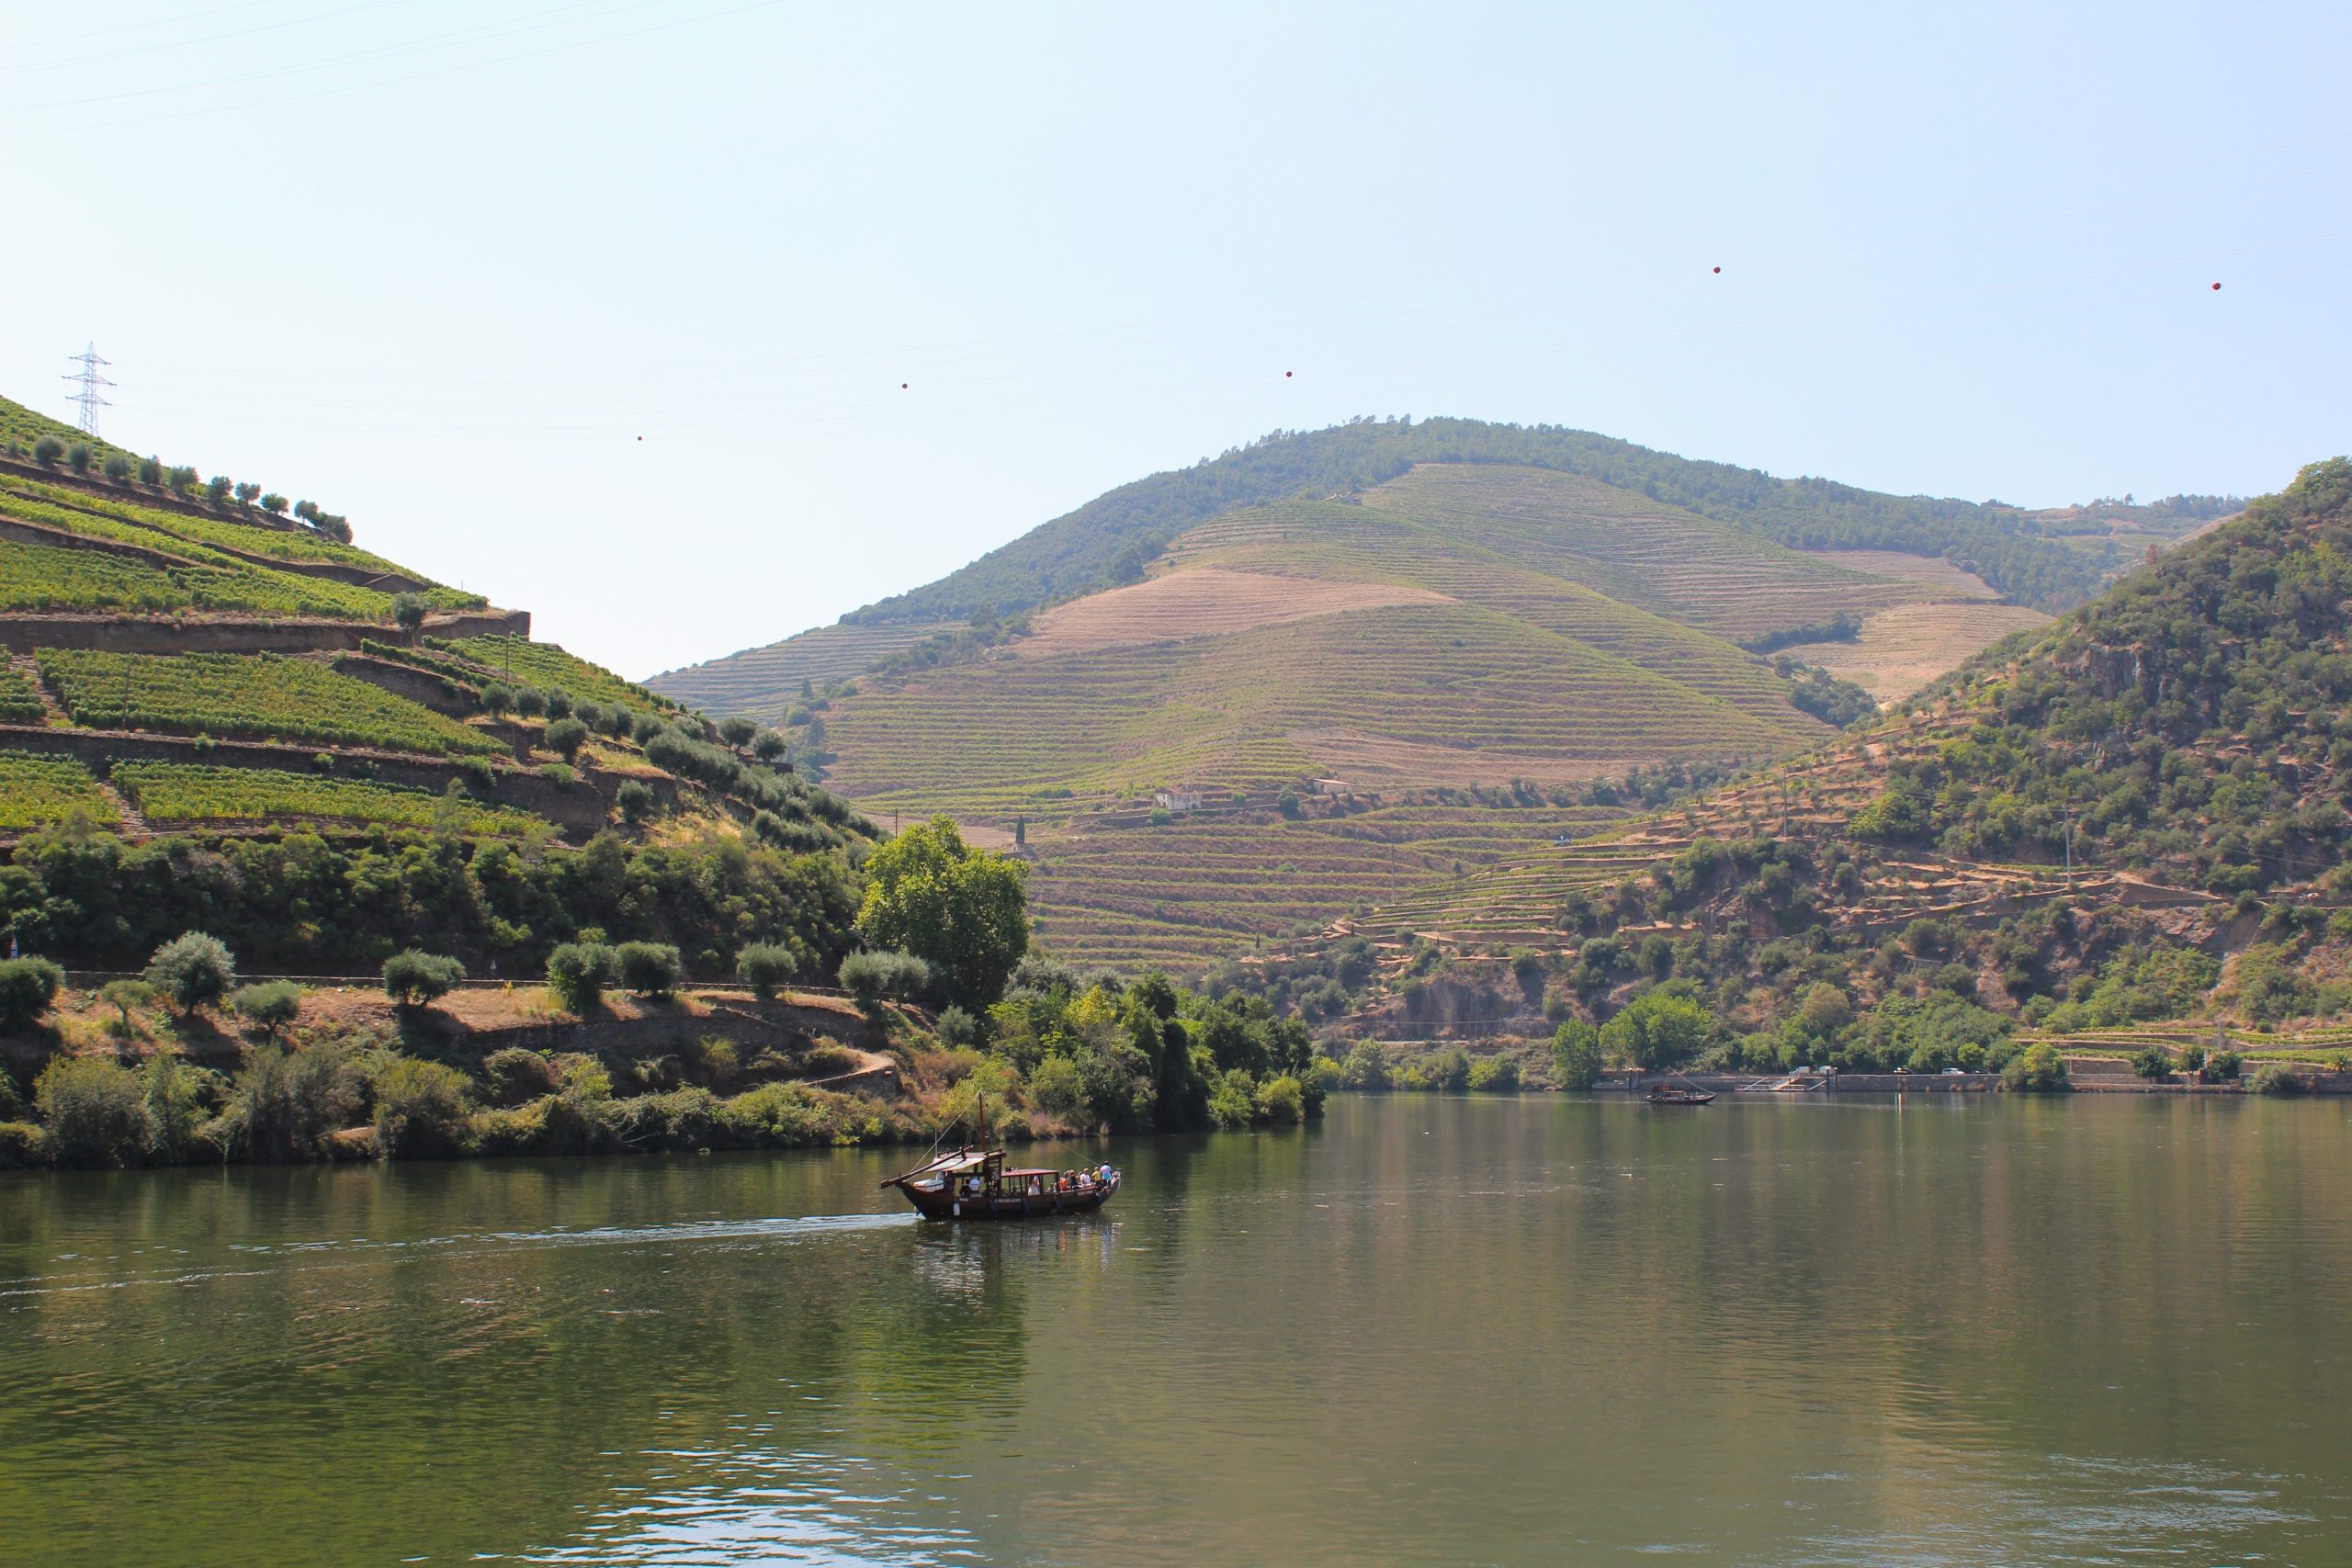 Image of a Douro Valley in Pinhão by Rui Alves, Unsplash